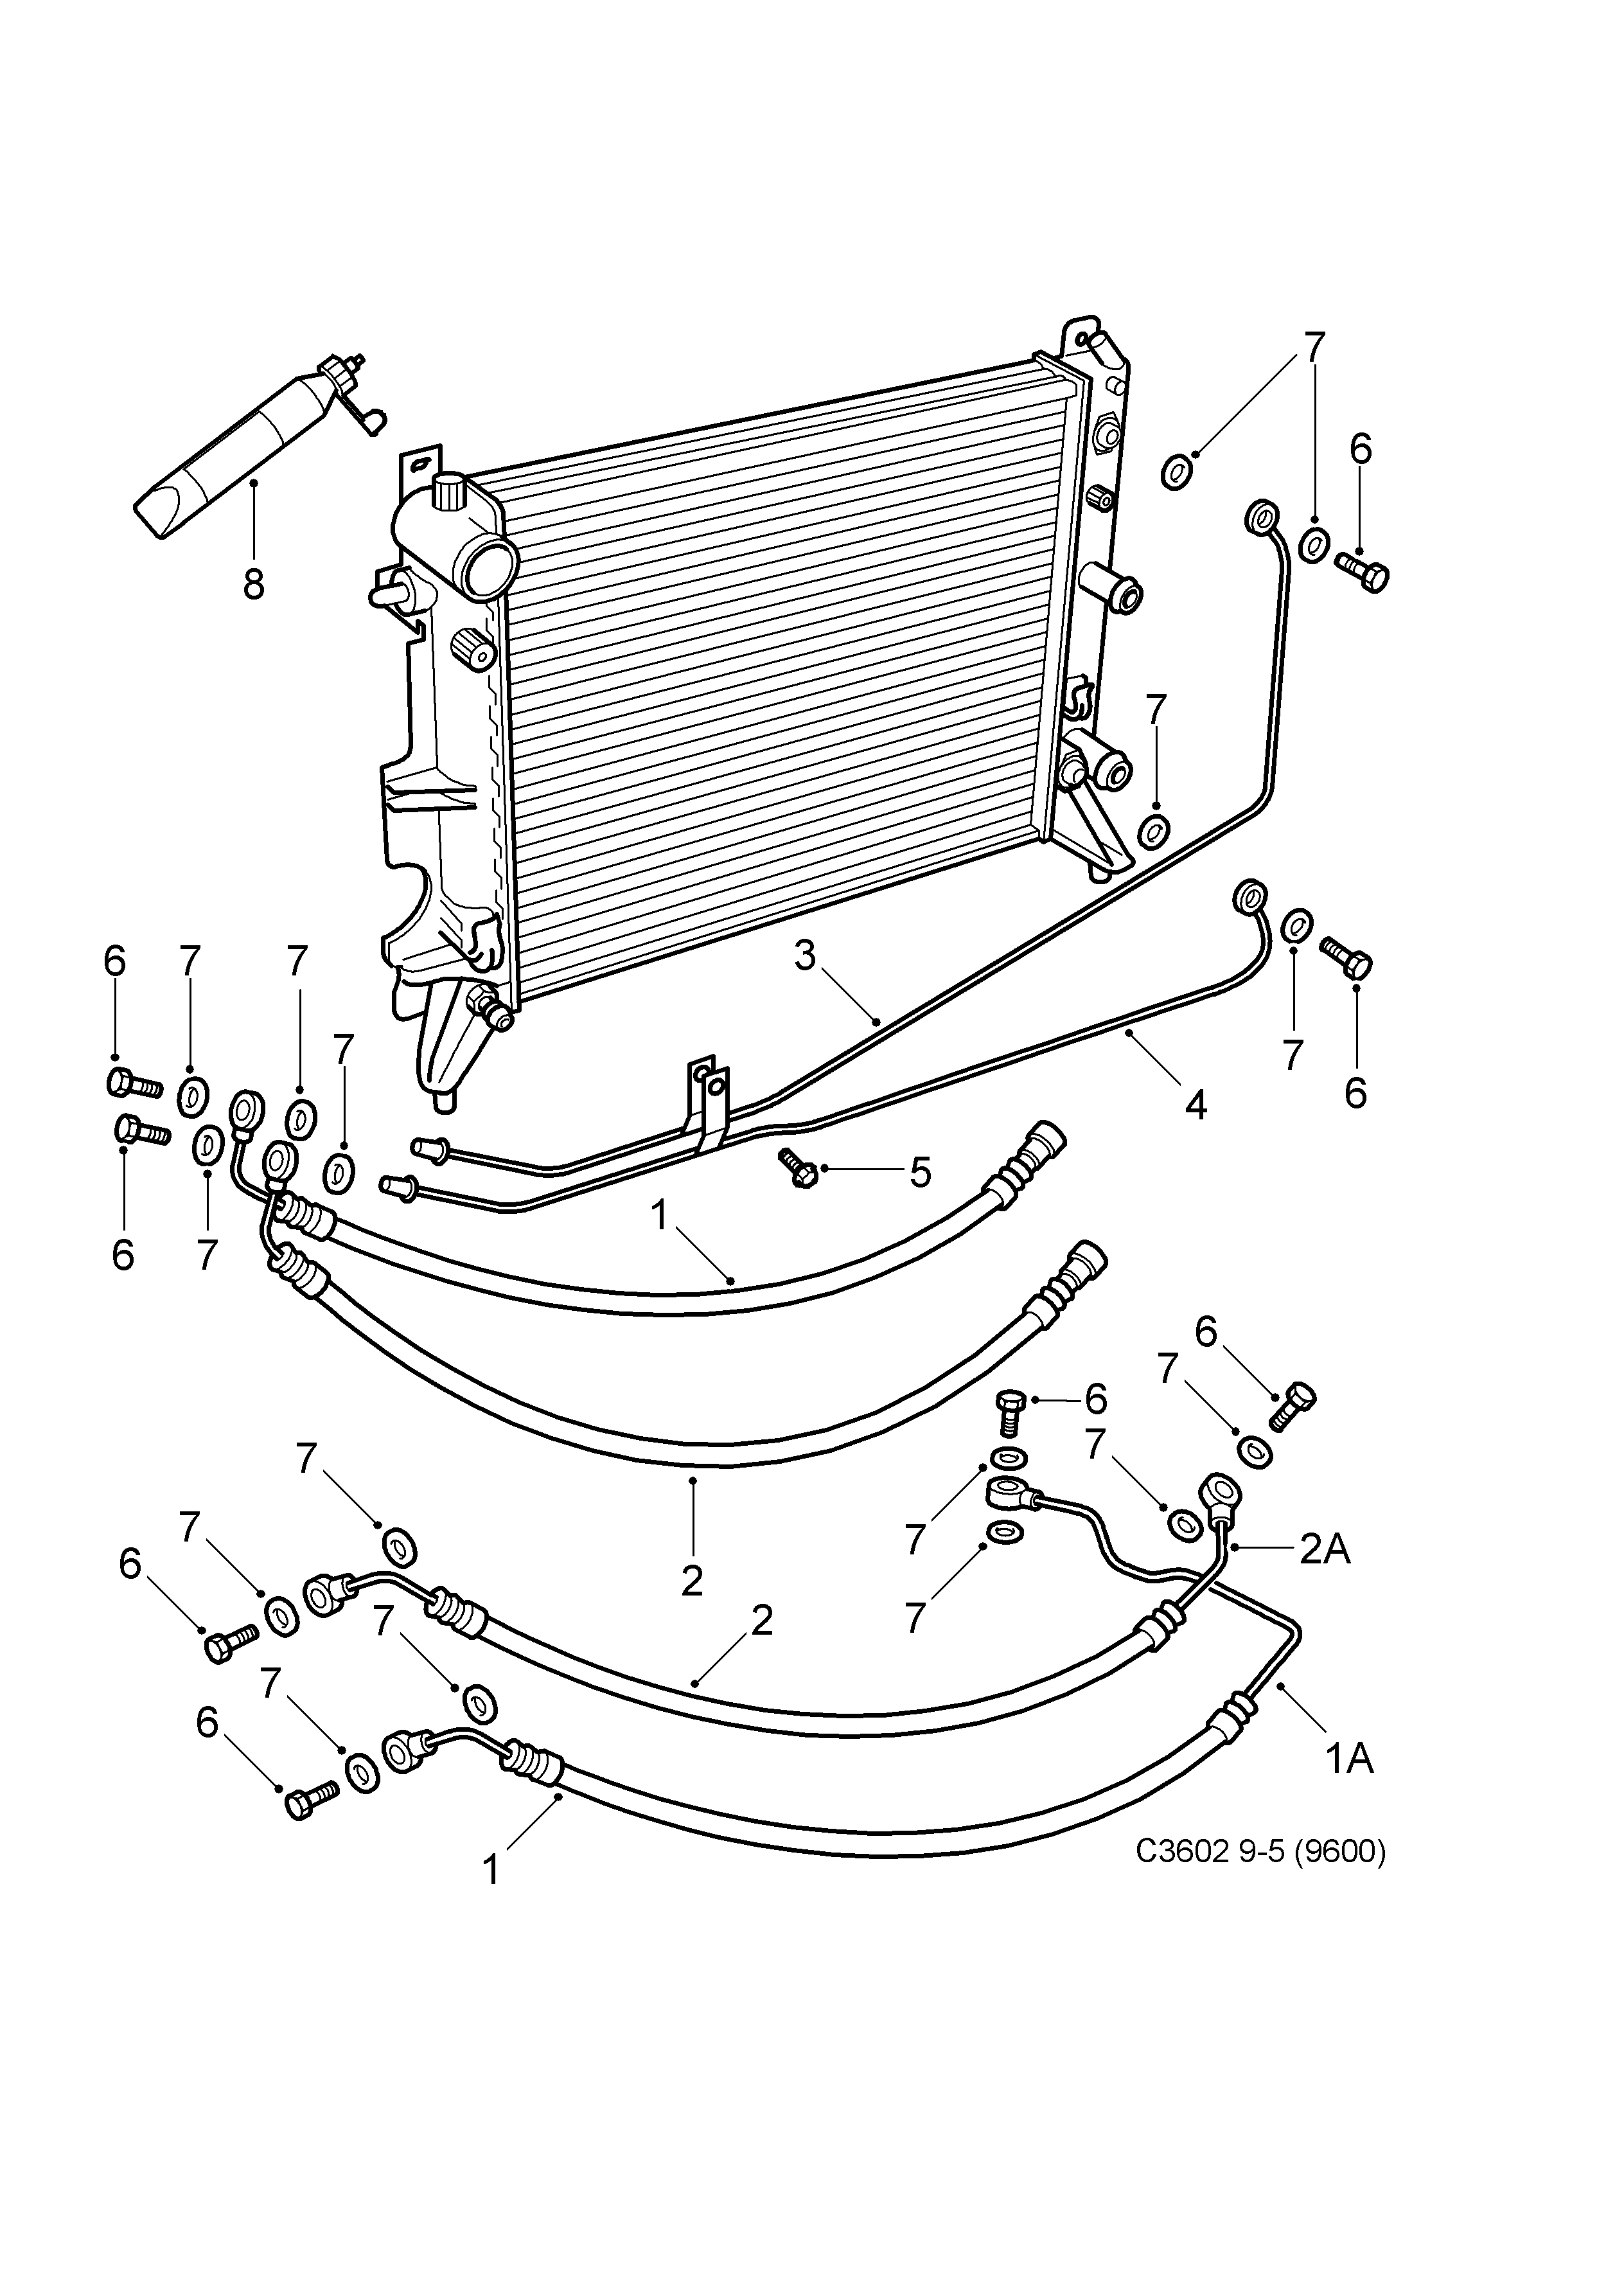 Oil cooler - Automatic transmission, (1998-2010) , A